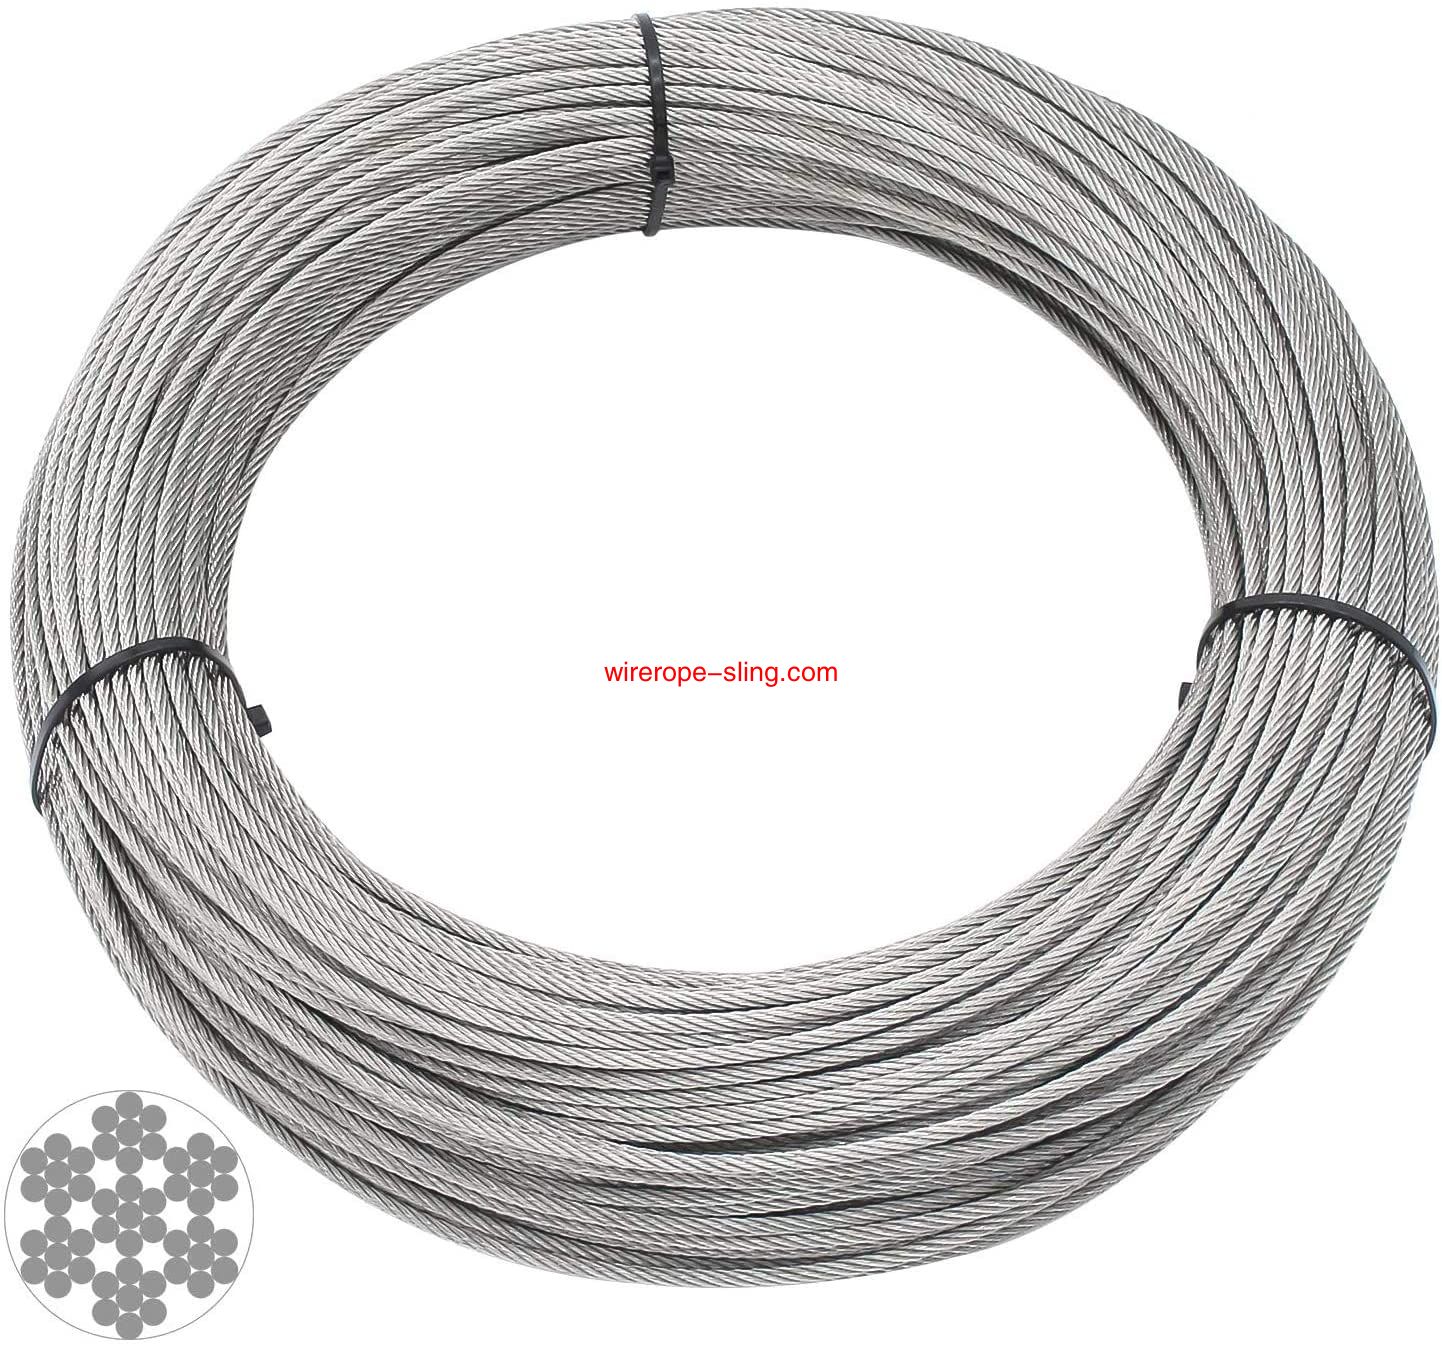 T316 Marin Grade 3mm Stainless Steel Aircraft Wire Rope Cable for Railing, Deking, Diy Balustrade, 100 Πόδια